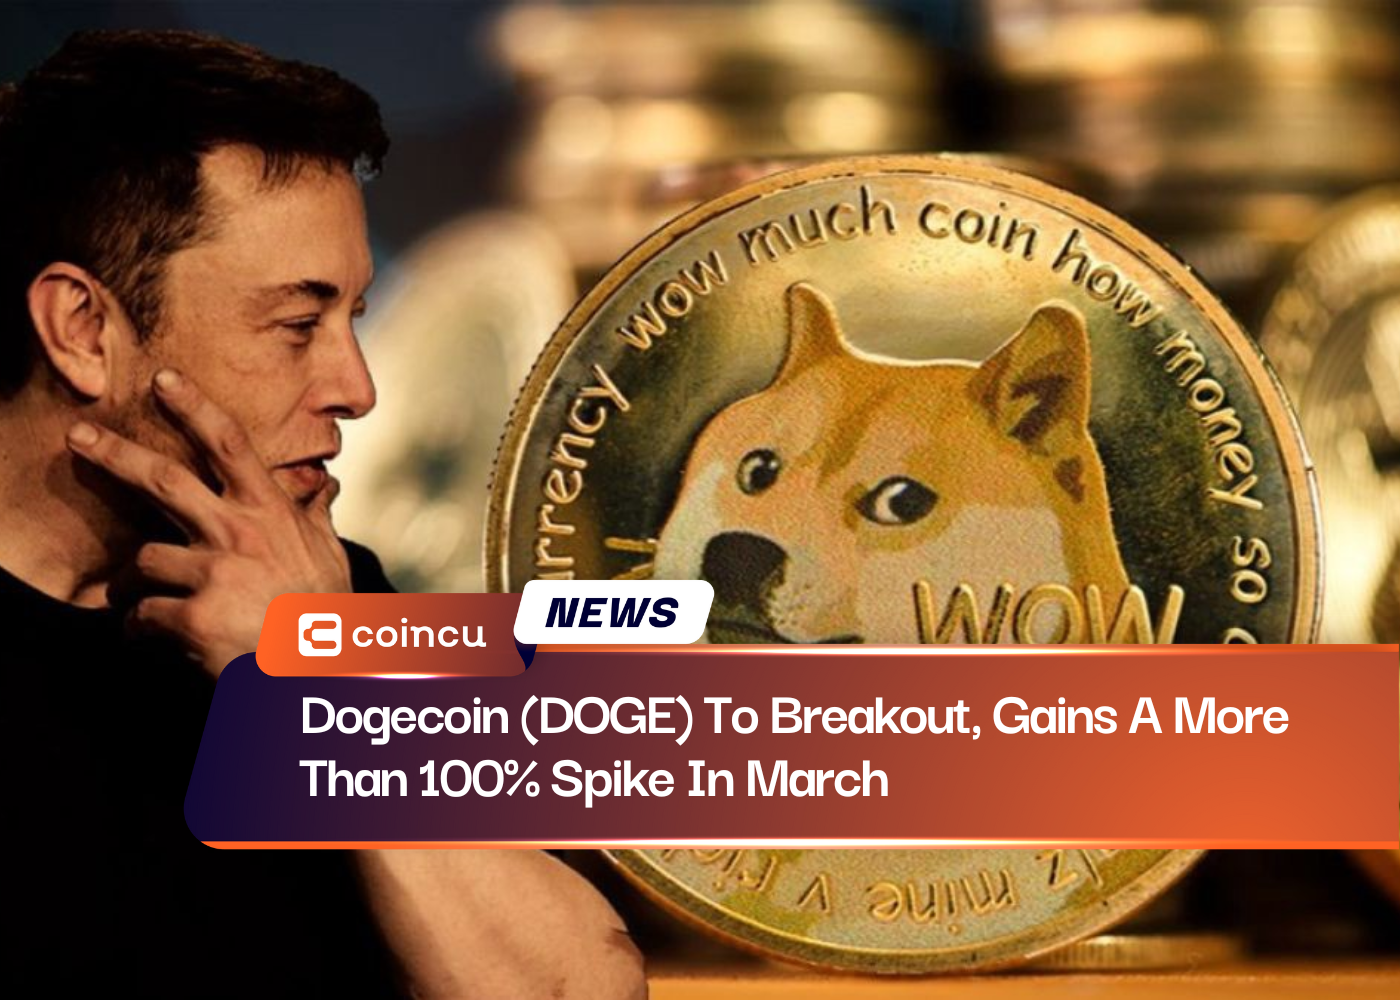 Dogecoin (DOGE) To Breakout, Gains A More Than 100% Spike In March